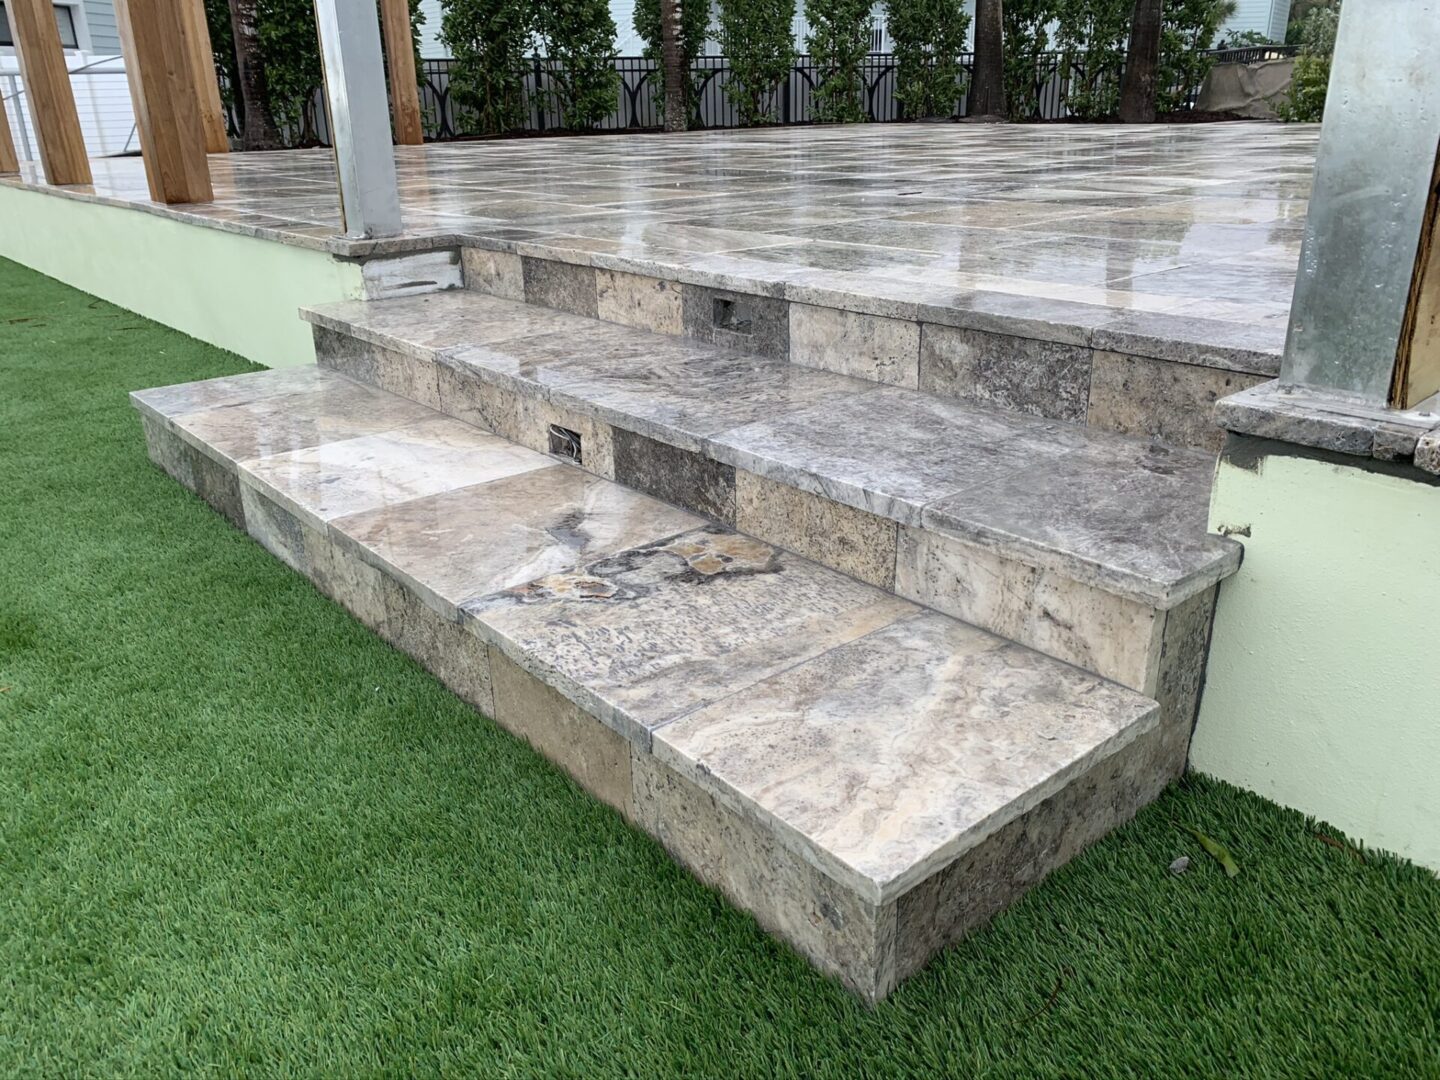 A set of three marble steps leading up to a stone patio, surrounded by manicured synthetic grass in an outdoor area.